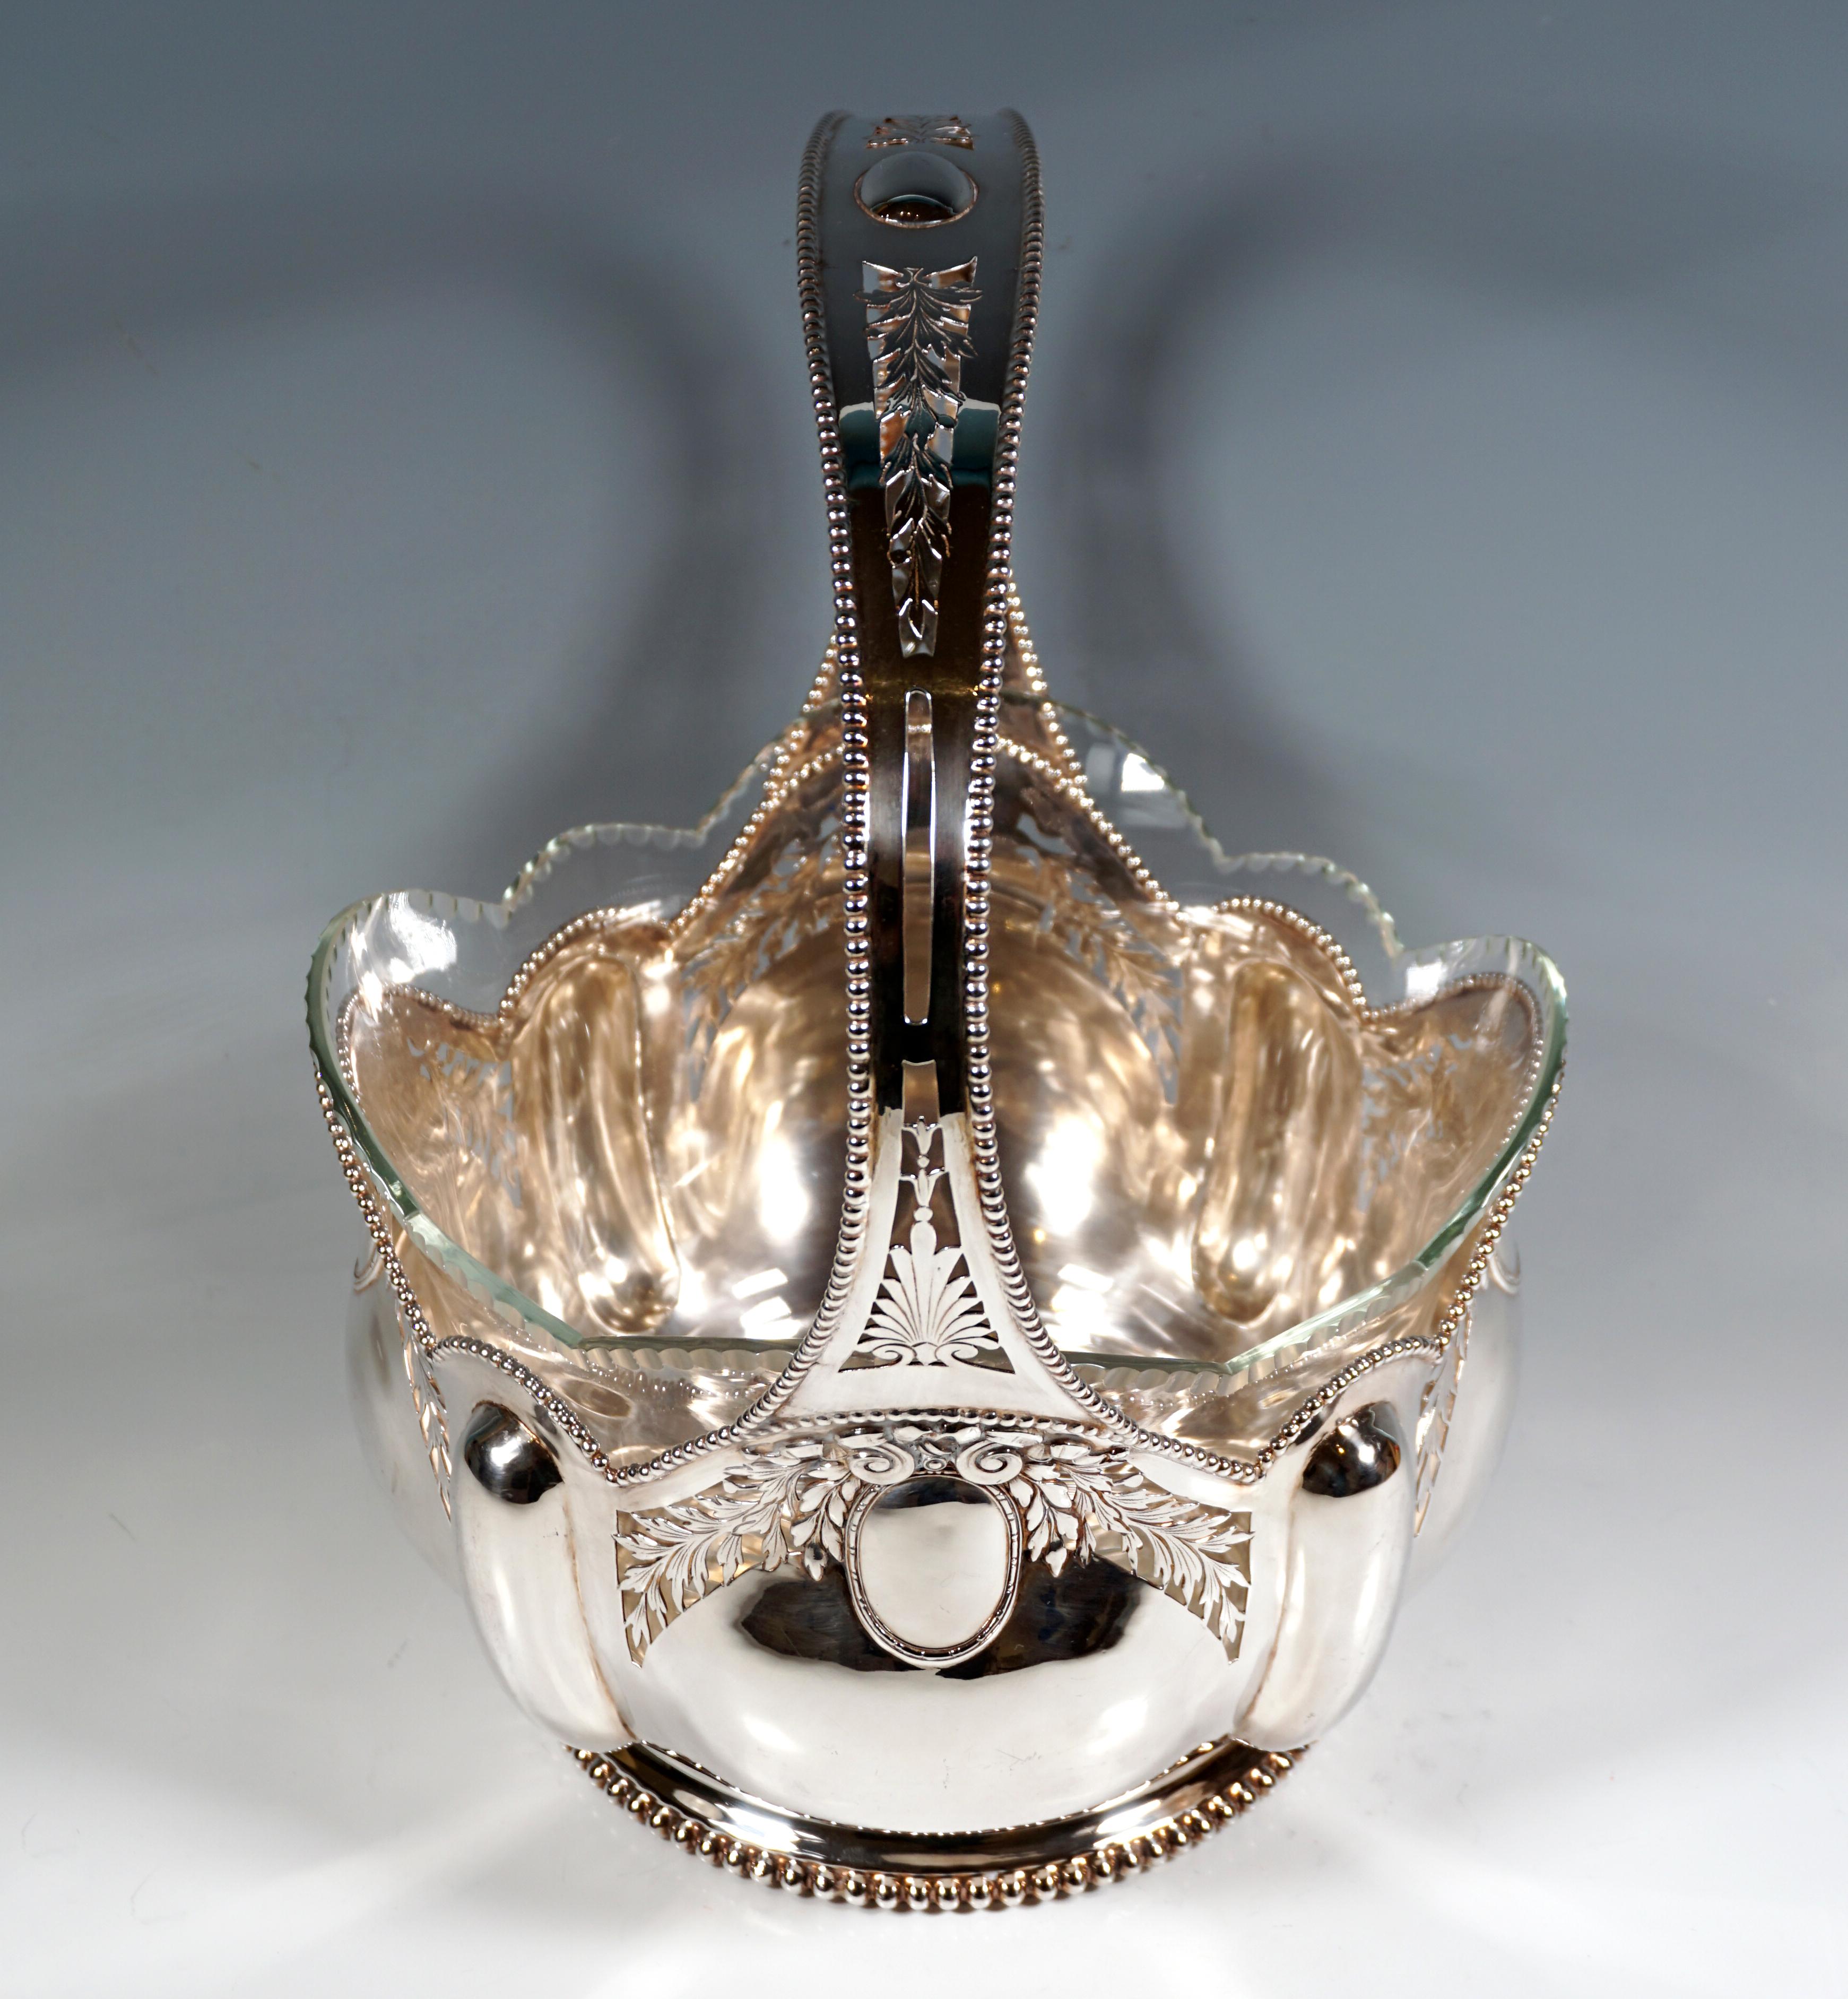 Hand-Crafted Art Nouveau Silver Jardinière, Basket with Handle, Germany, Around 1900 For Sale